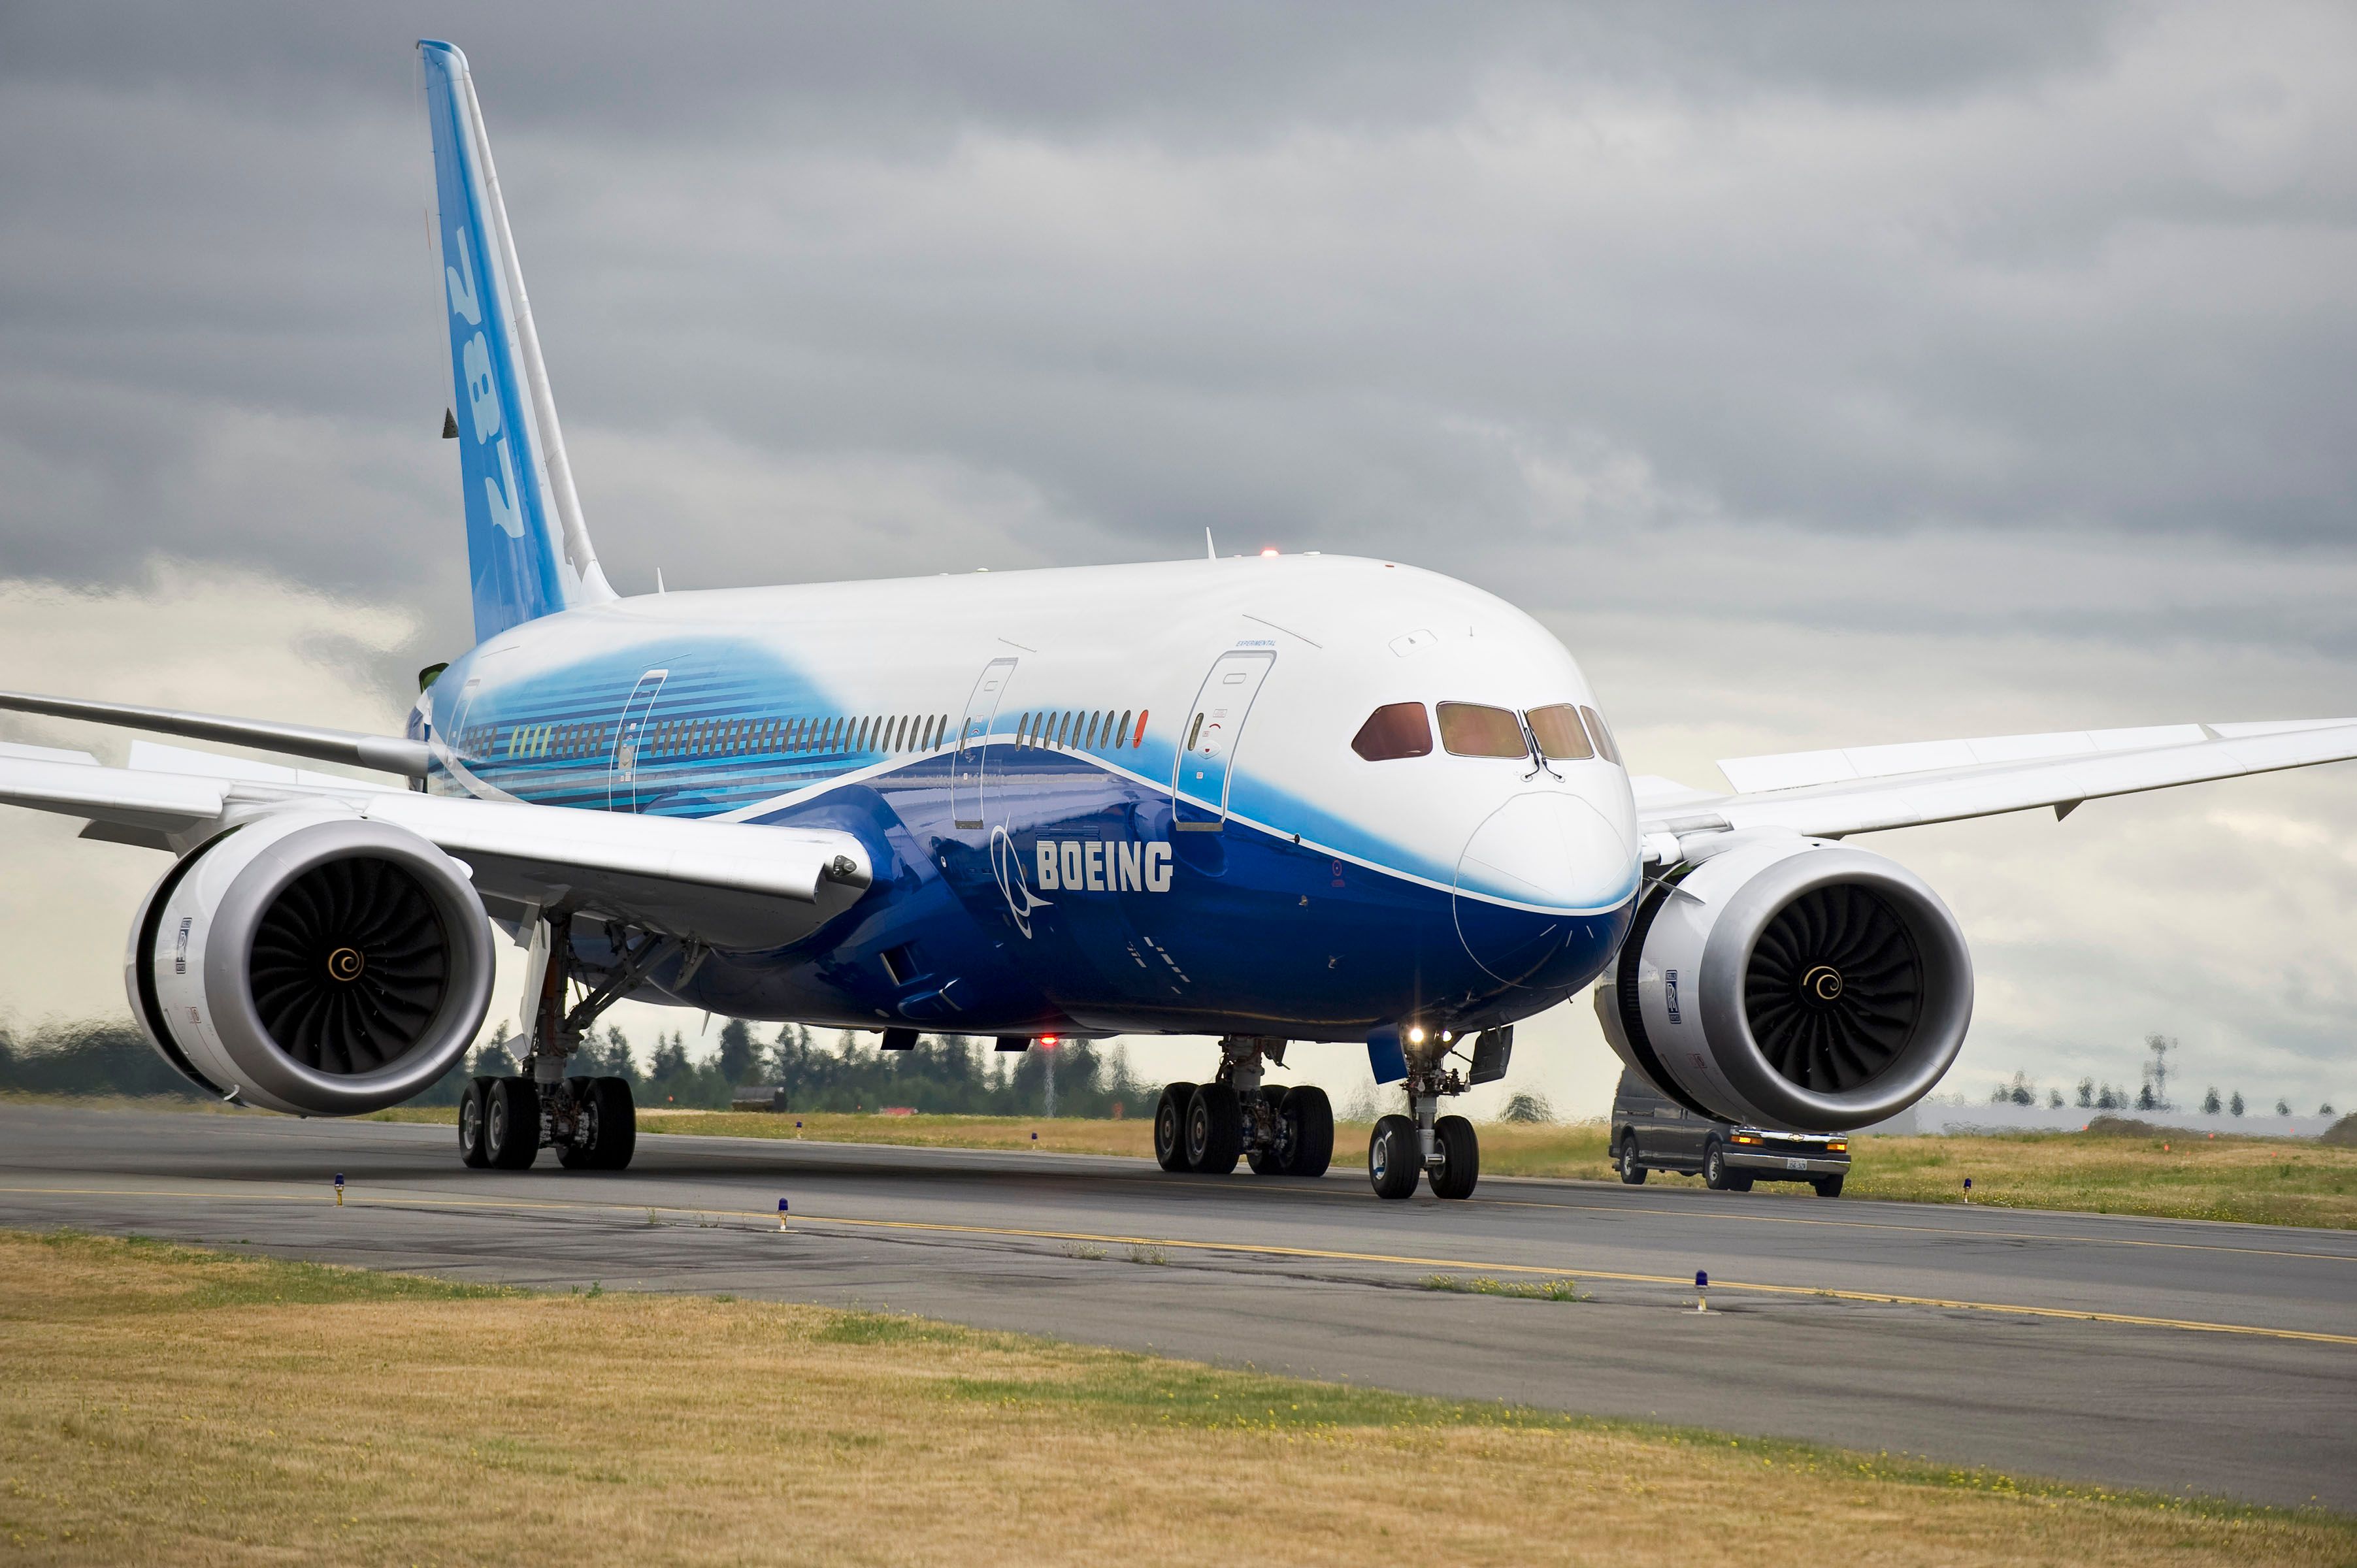 5 Things To Know About The No-Bleed Architecture On The Boeing 787